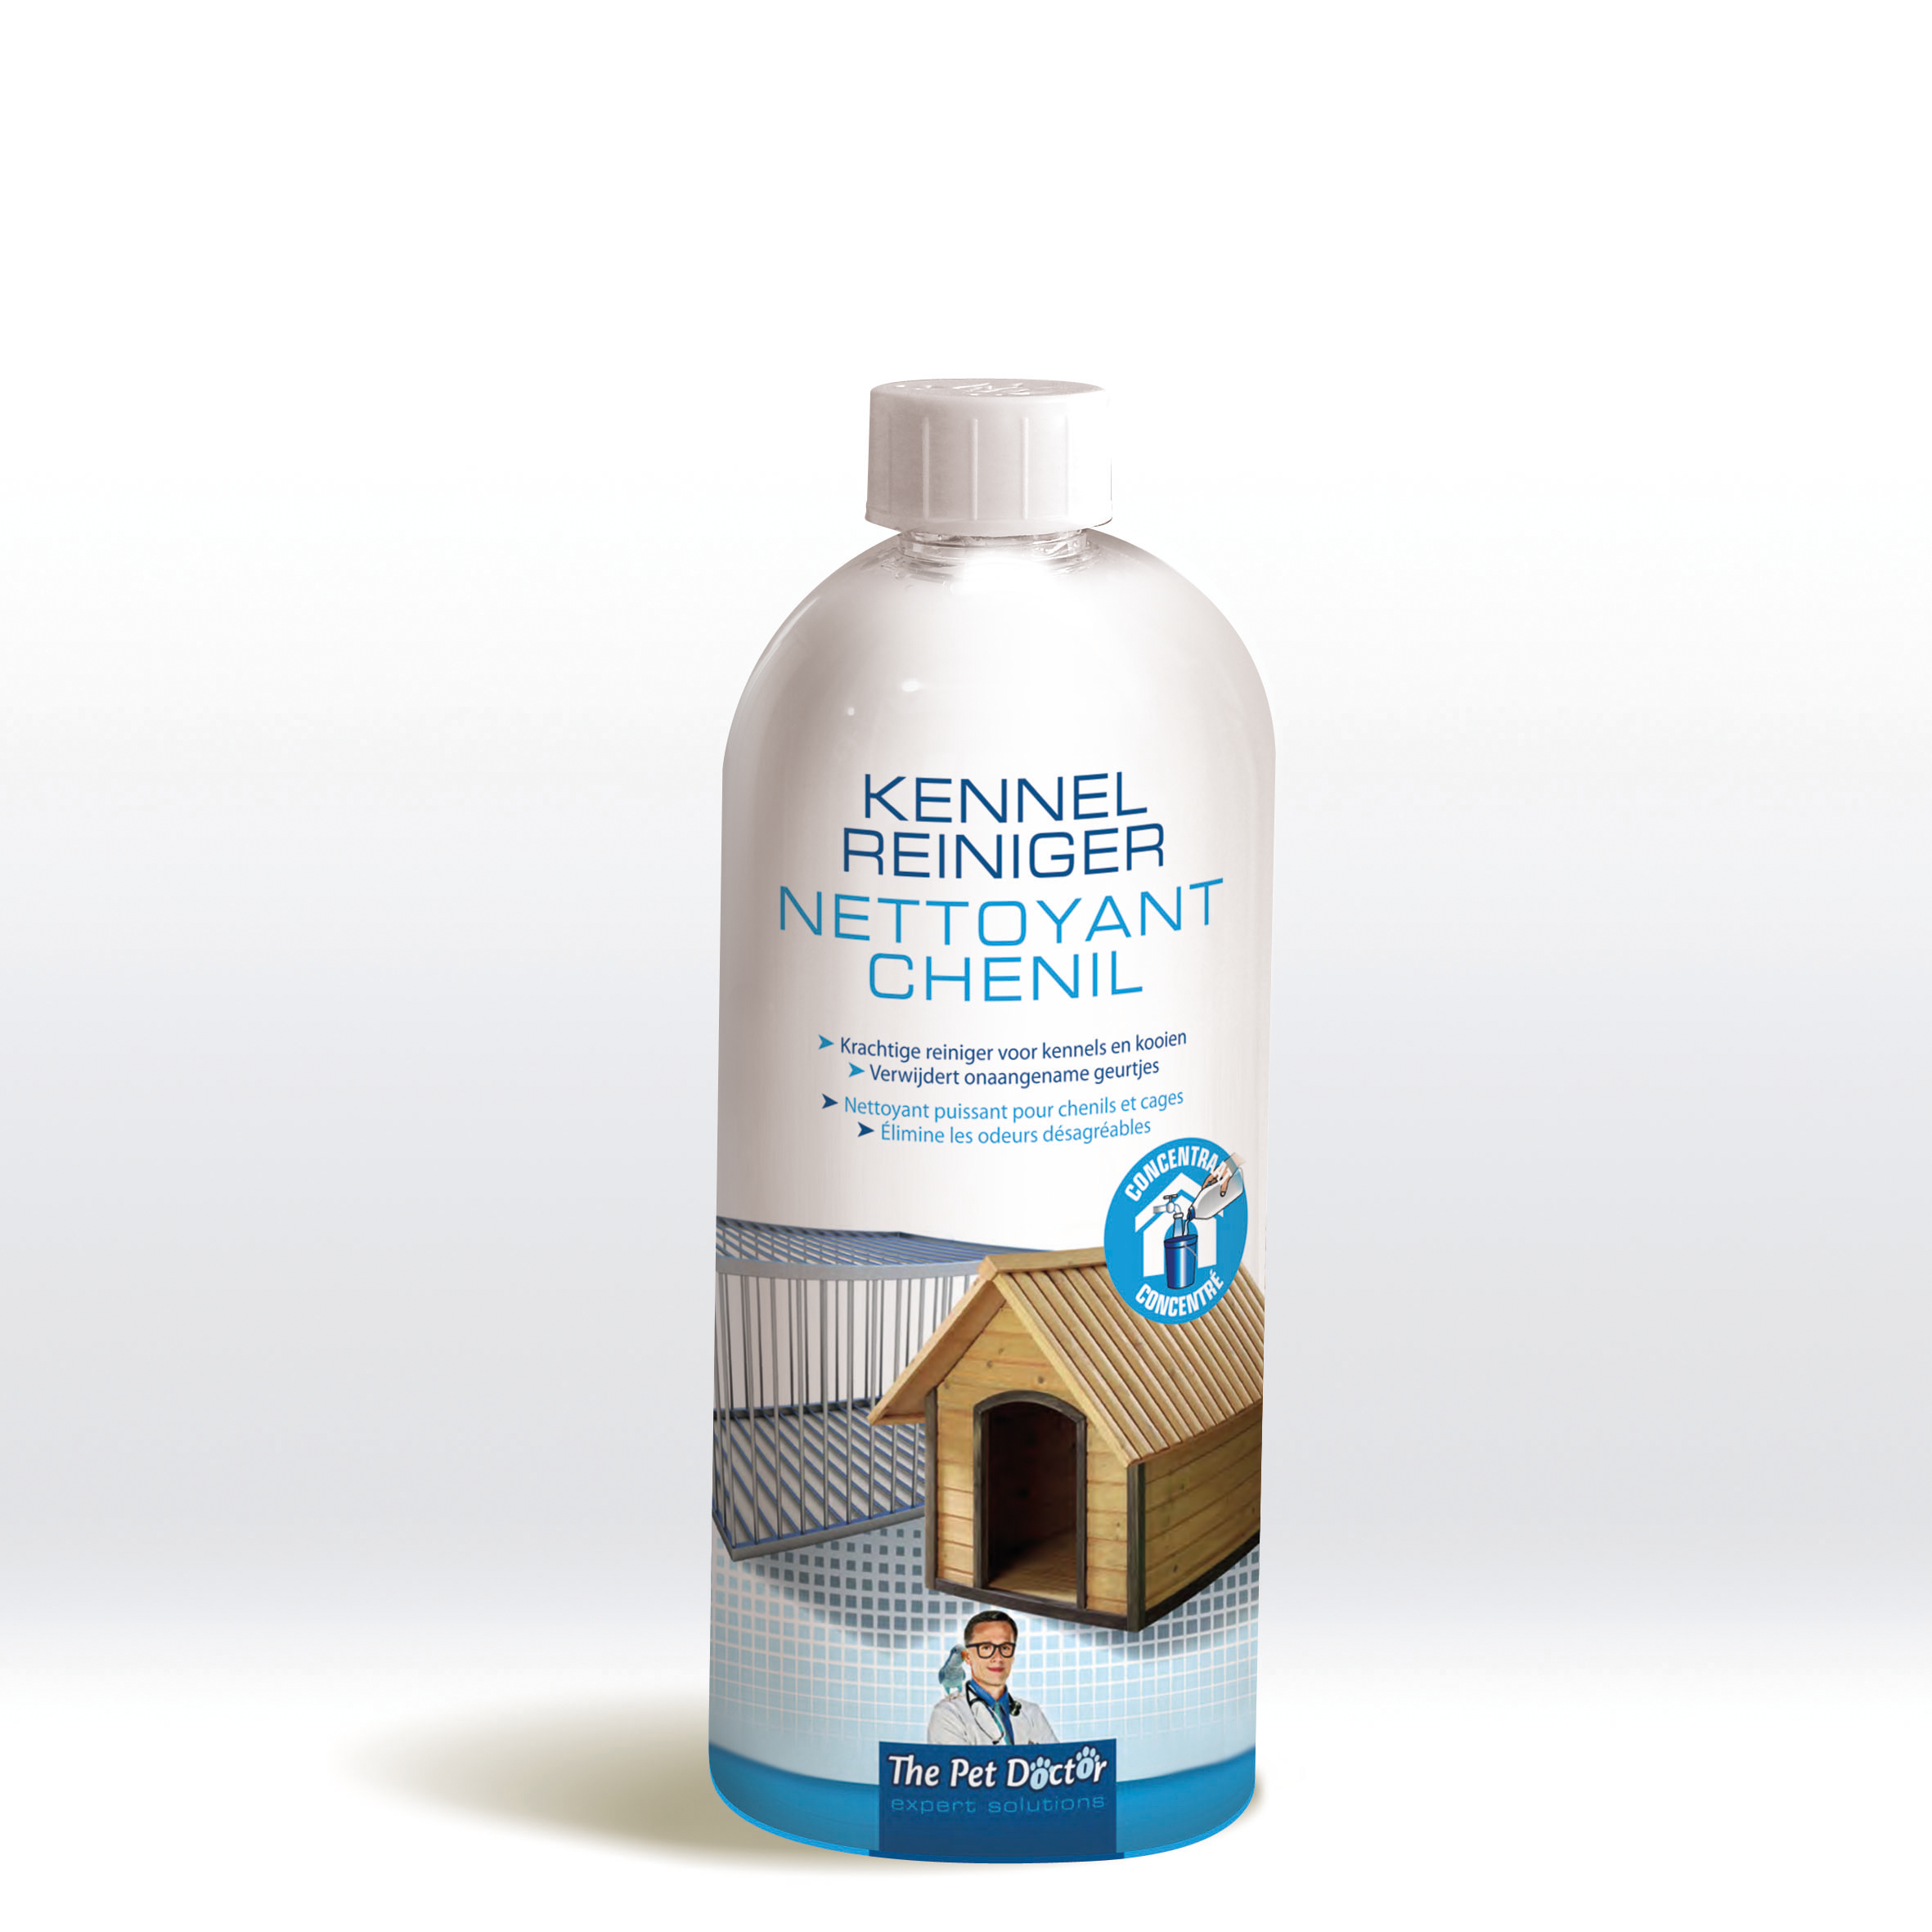 The Pet Doctor Kennelreiniger Concentraat 950 ml image